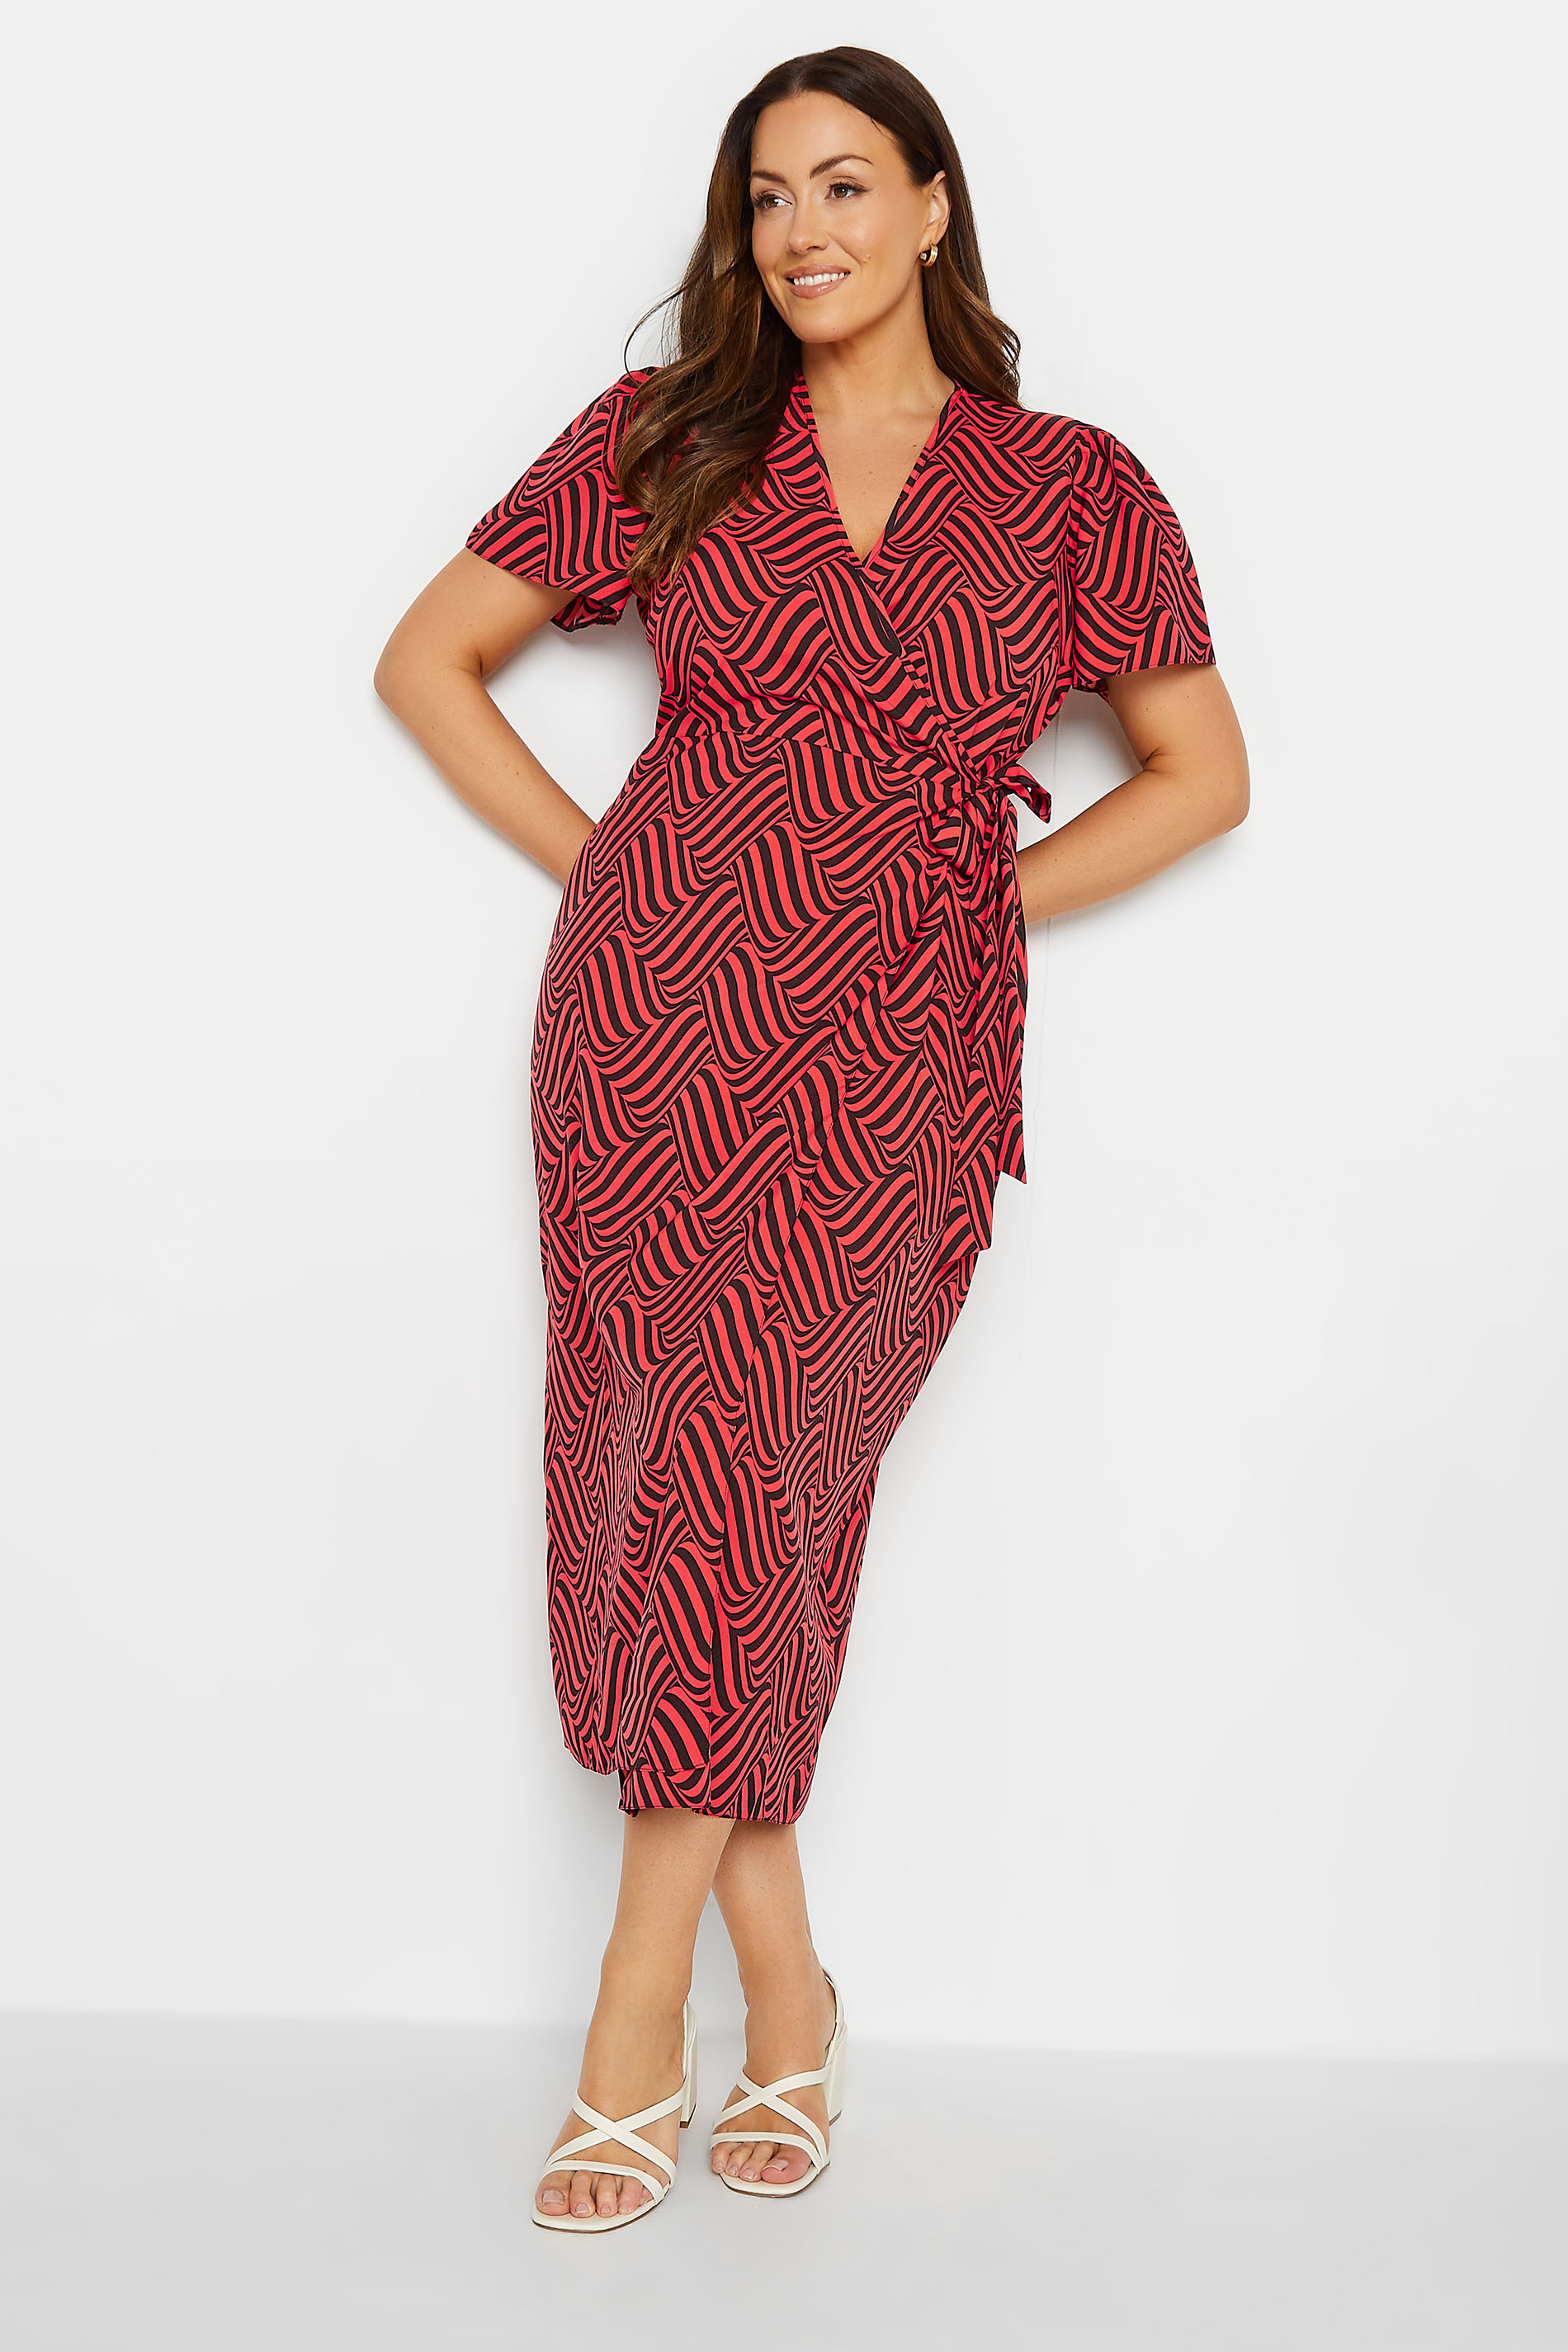 M&Co Red Abstract Stripe Wrap Dress | M&Co 2